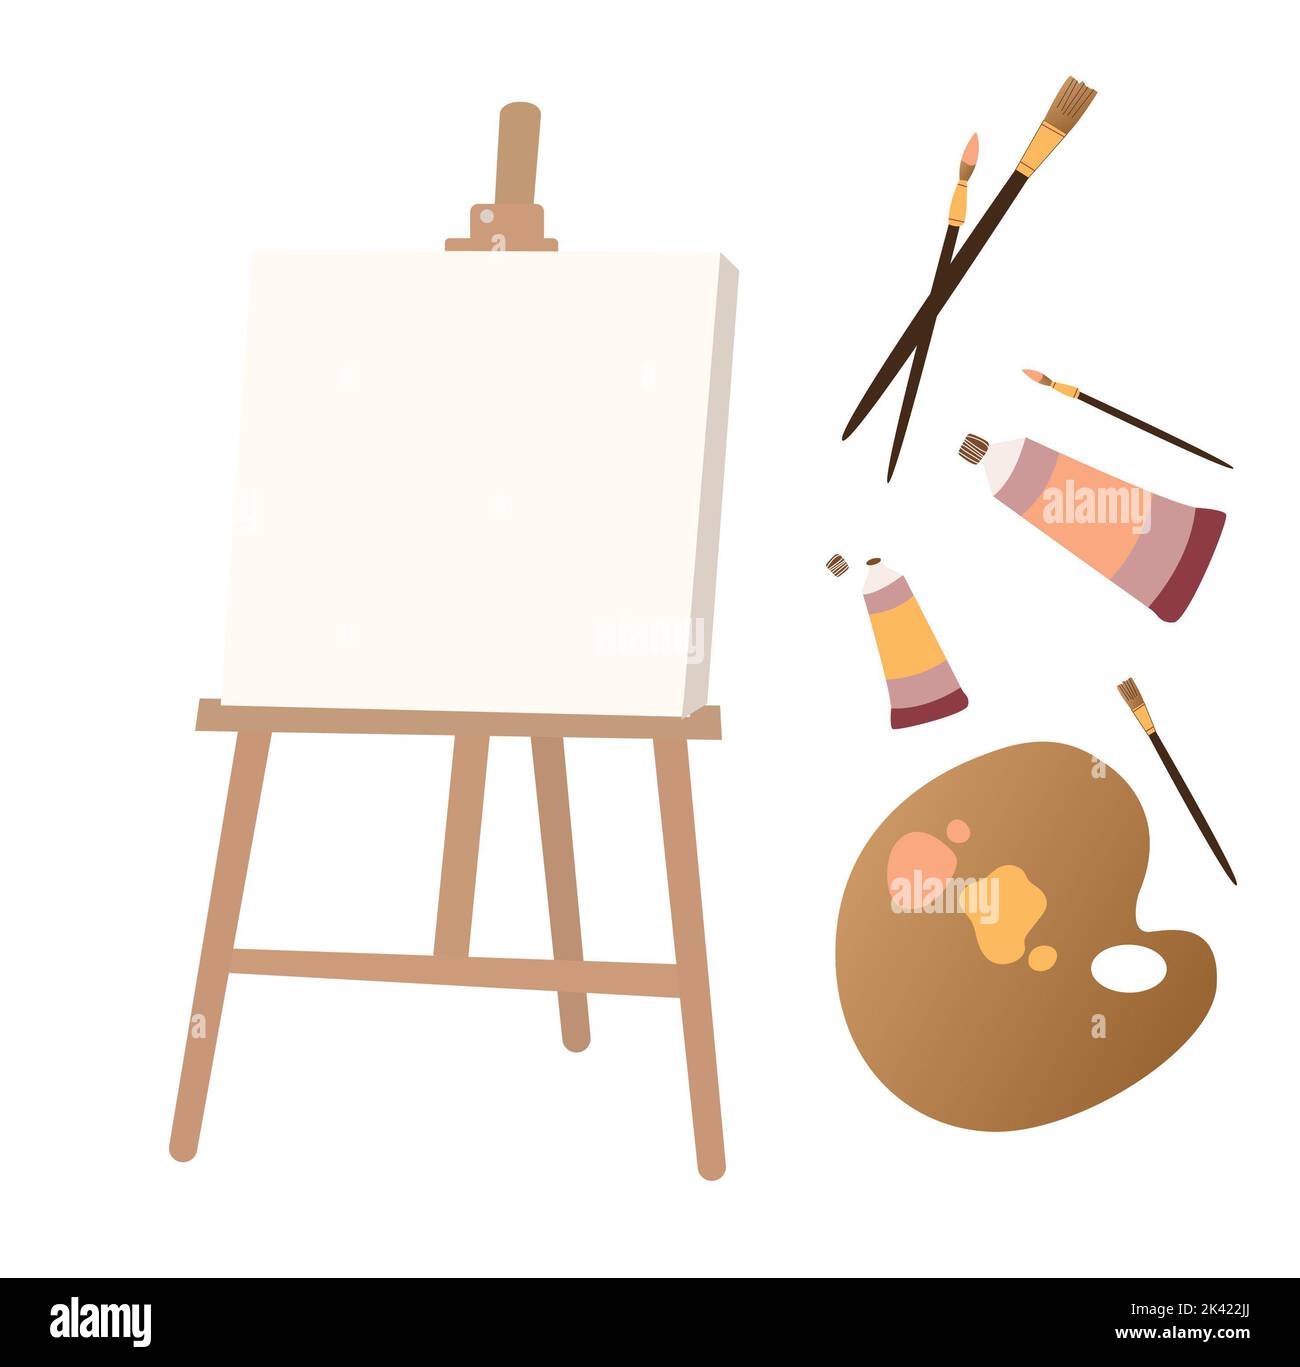 Painters Palette Cartoon Stock Vector (Royalty Free) 139966504